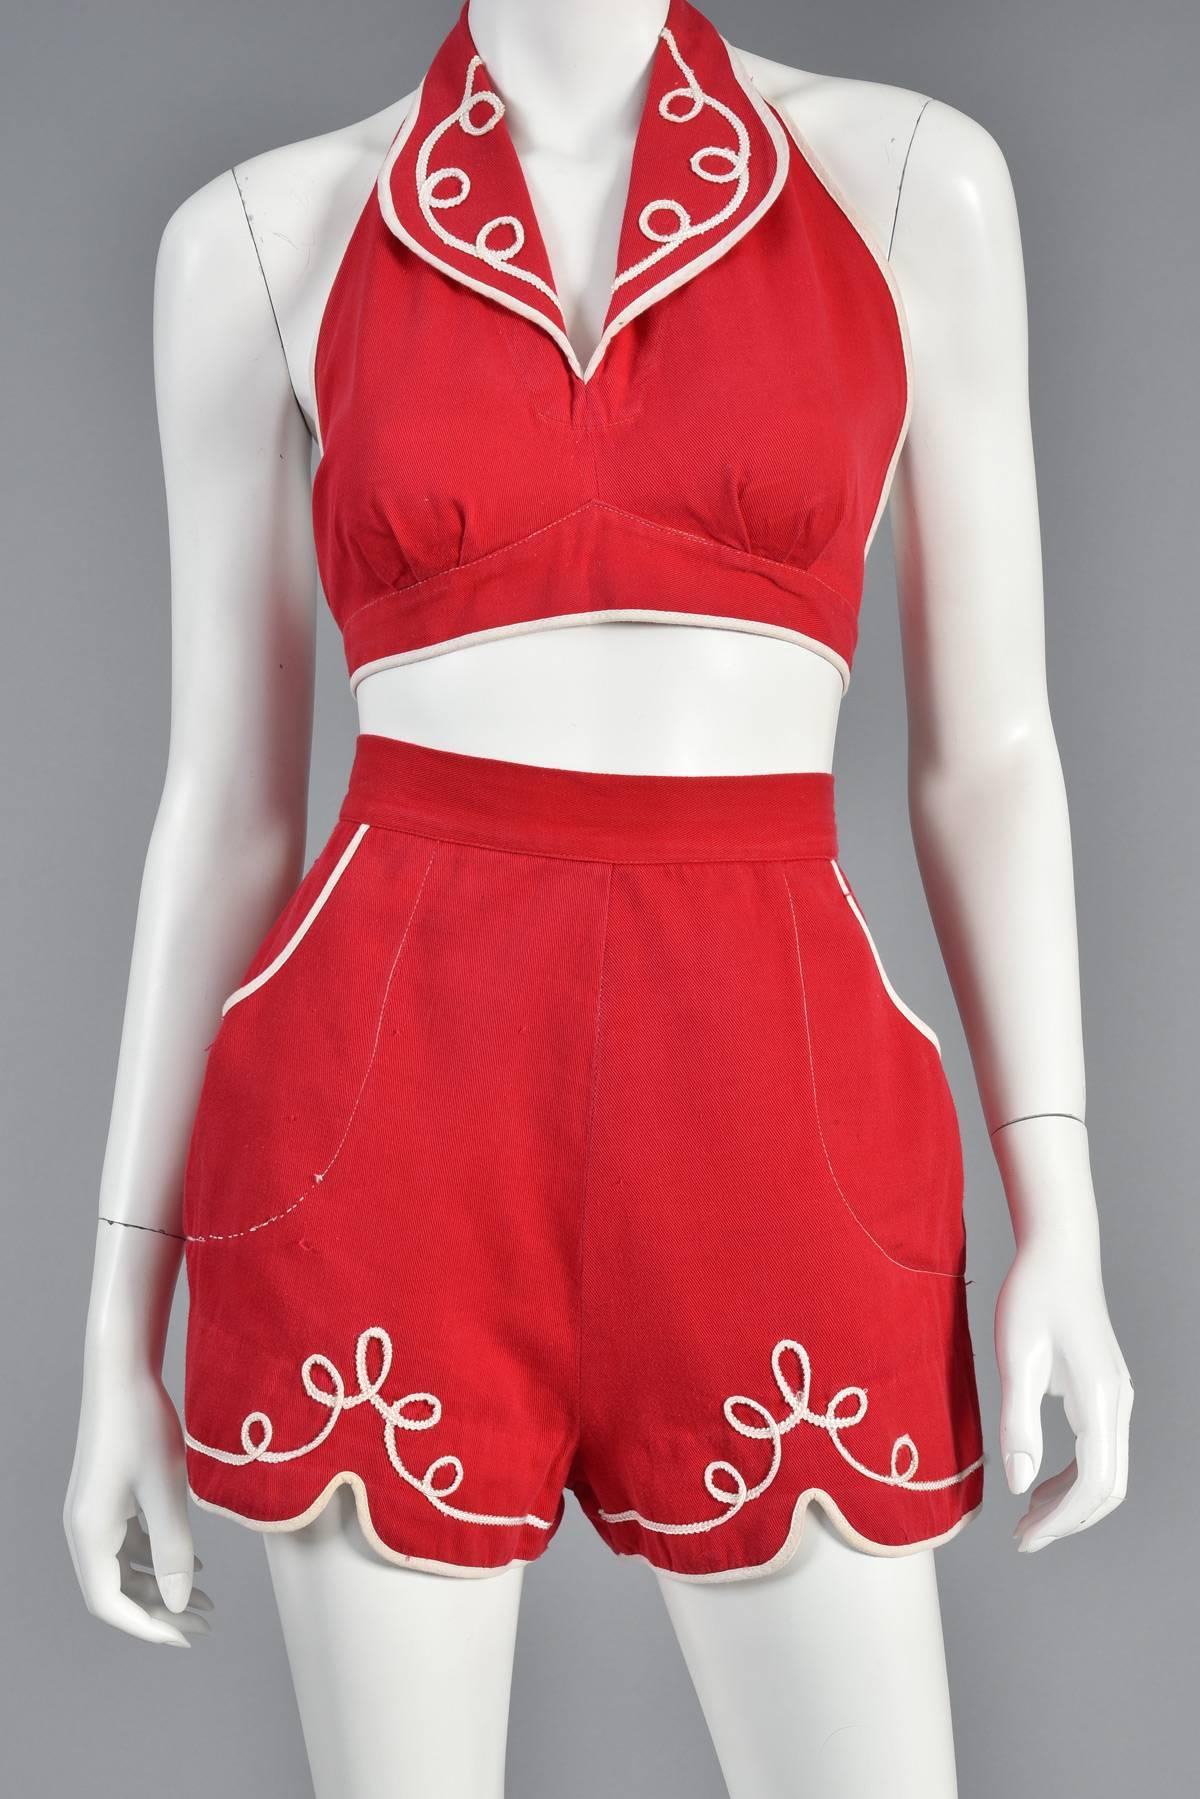 Women's 1940s 2 Piece Red Play Suit with White Trim For Sale